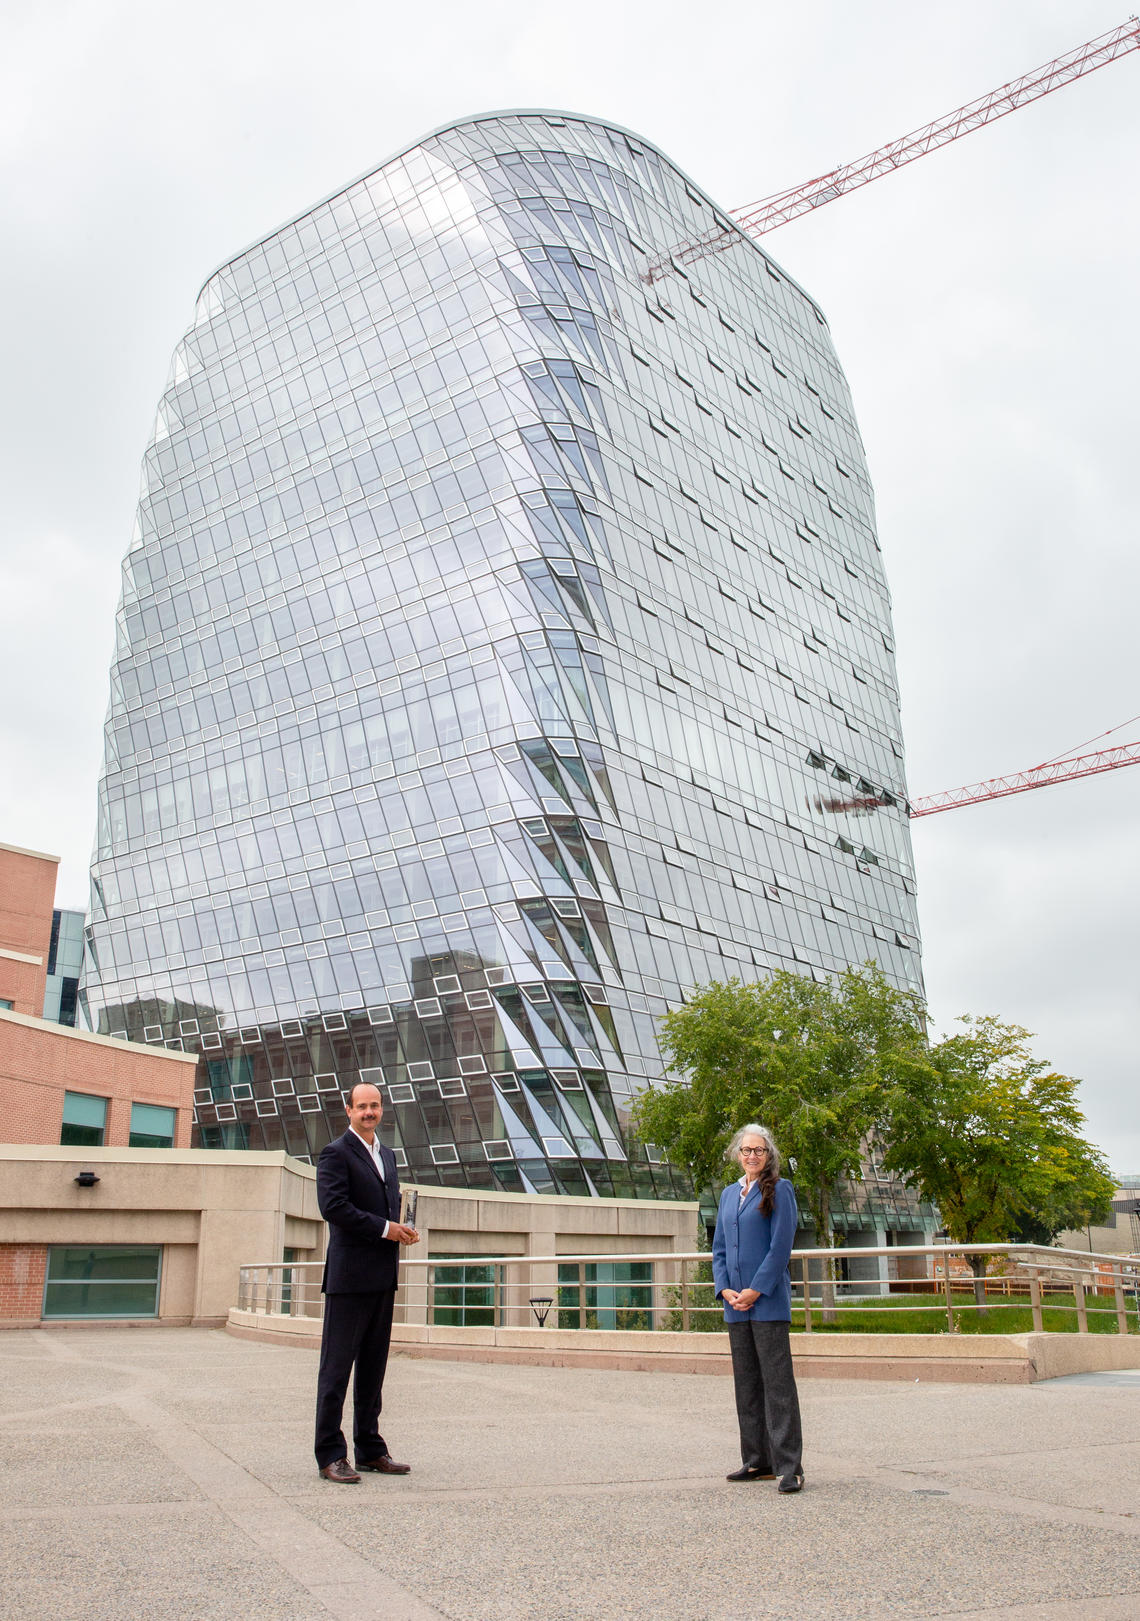 Joanne Perdue, AVP, Sustainability, and Boris Dragicevic, AVP, Facilities Development, hold the Zero Carbon Green Building Excellence Award for the MacKimmie Tower and its sustainability features.